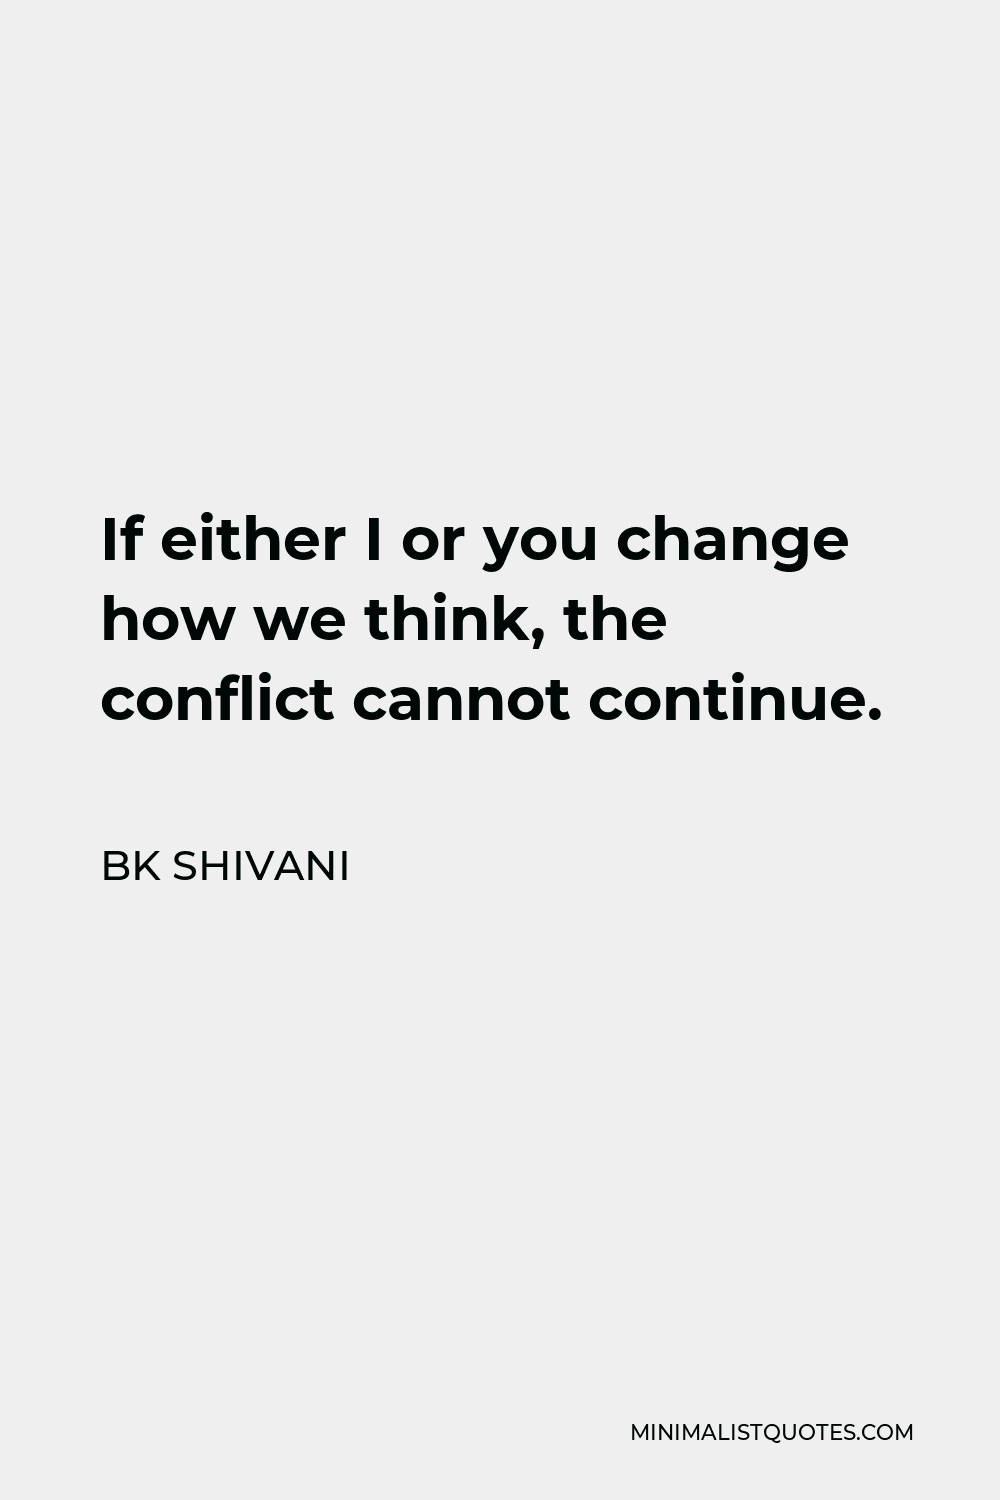 BK Shivani Quote - If either I or you change how we think, the conflict cannot continue.